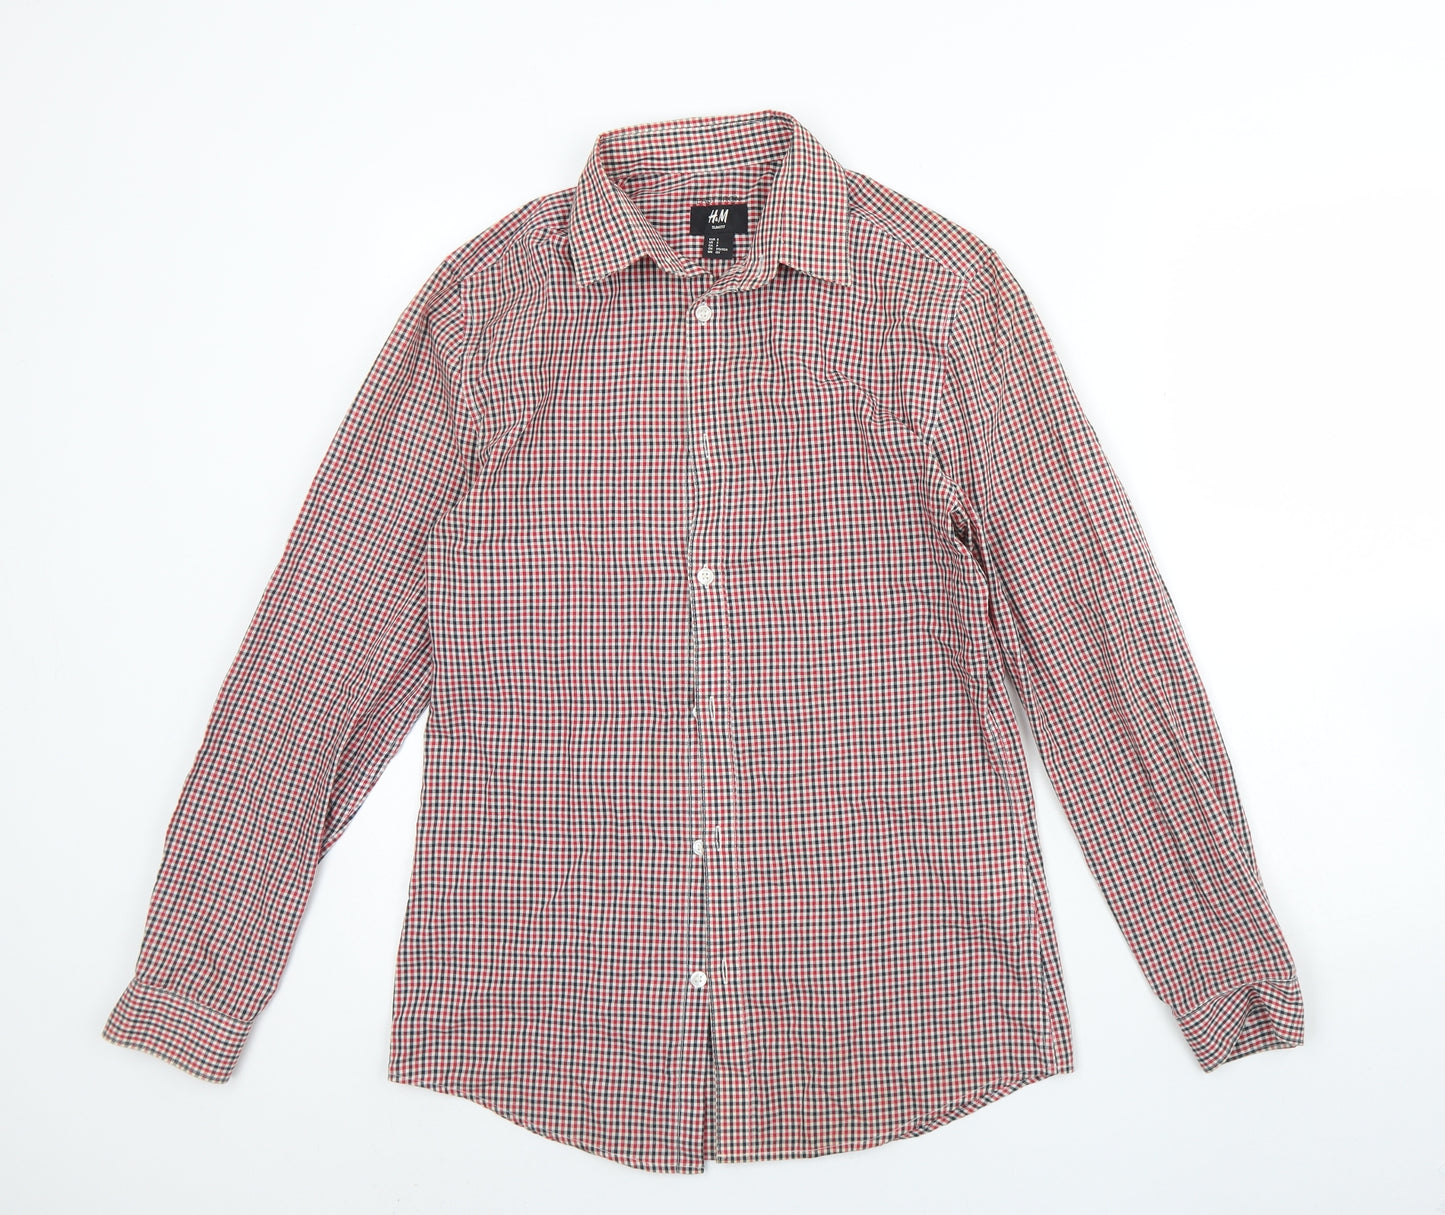 H&M Mens Red Plaid Cotton  Dress Shirt Size S Collared Button